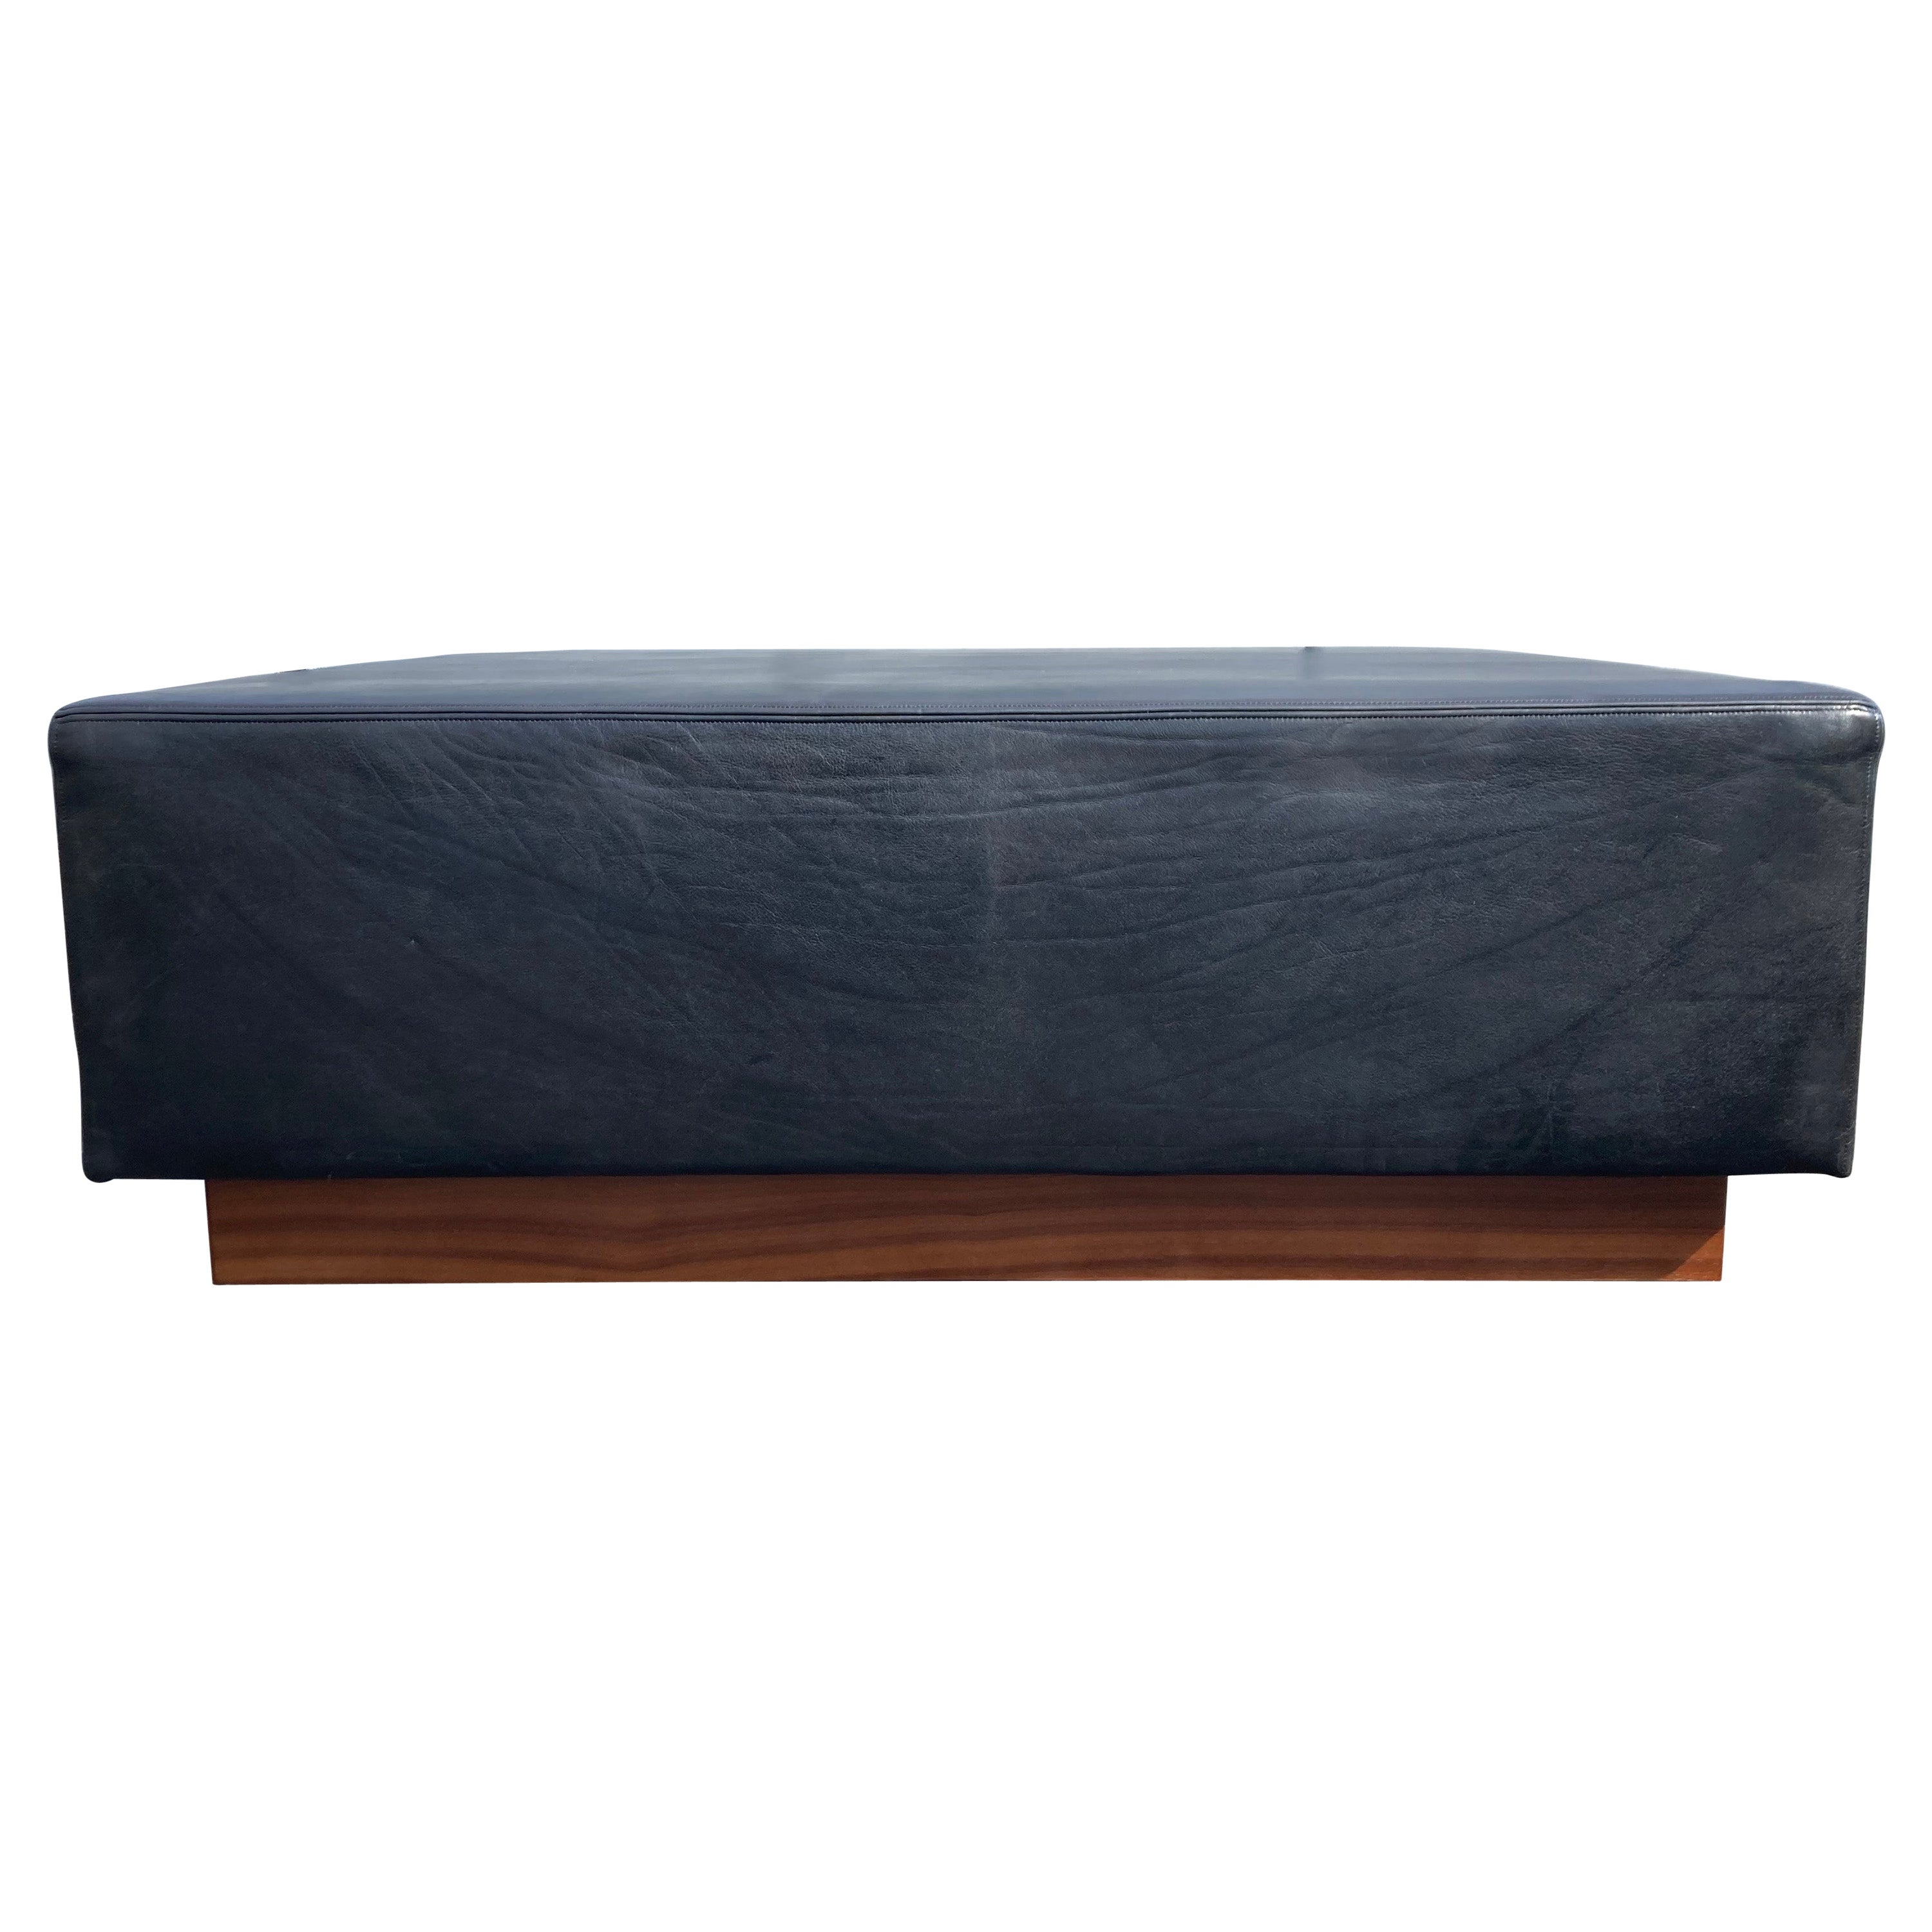 Large Black Leather Ottoman Bench Daybed, Mid-Century Modern Style